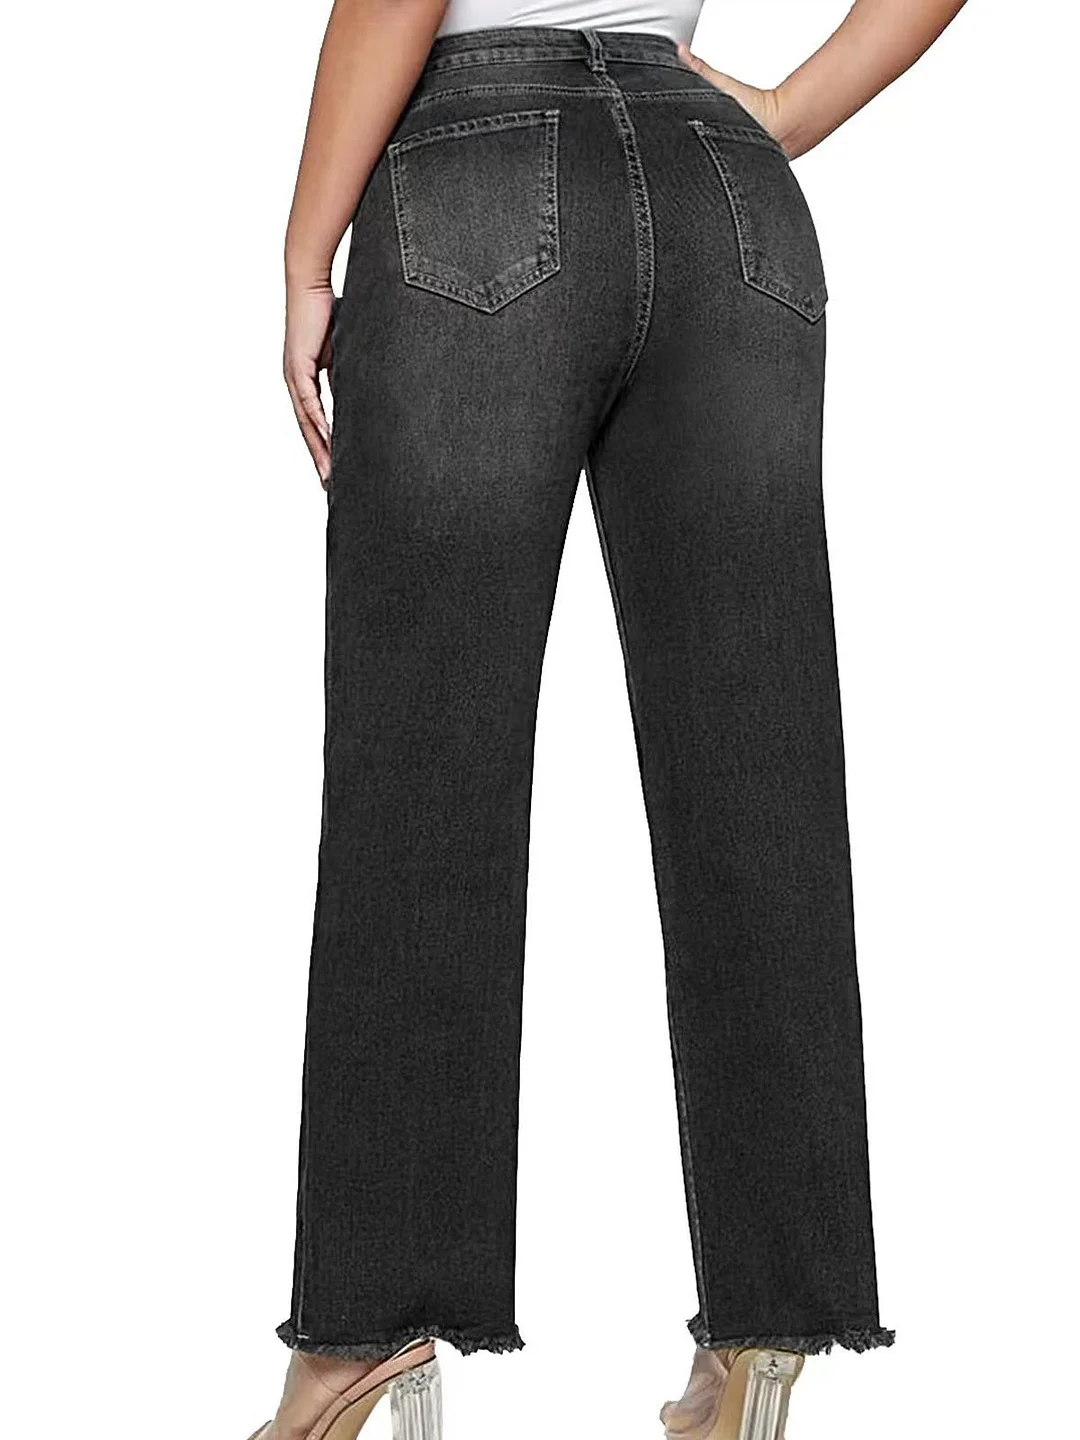 Women plus size clothing Women's Mid-Rise Straight Leg Loose Retro Washed Jeans-Nordswear